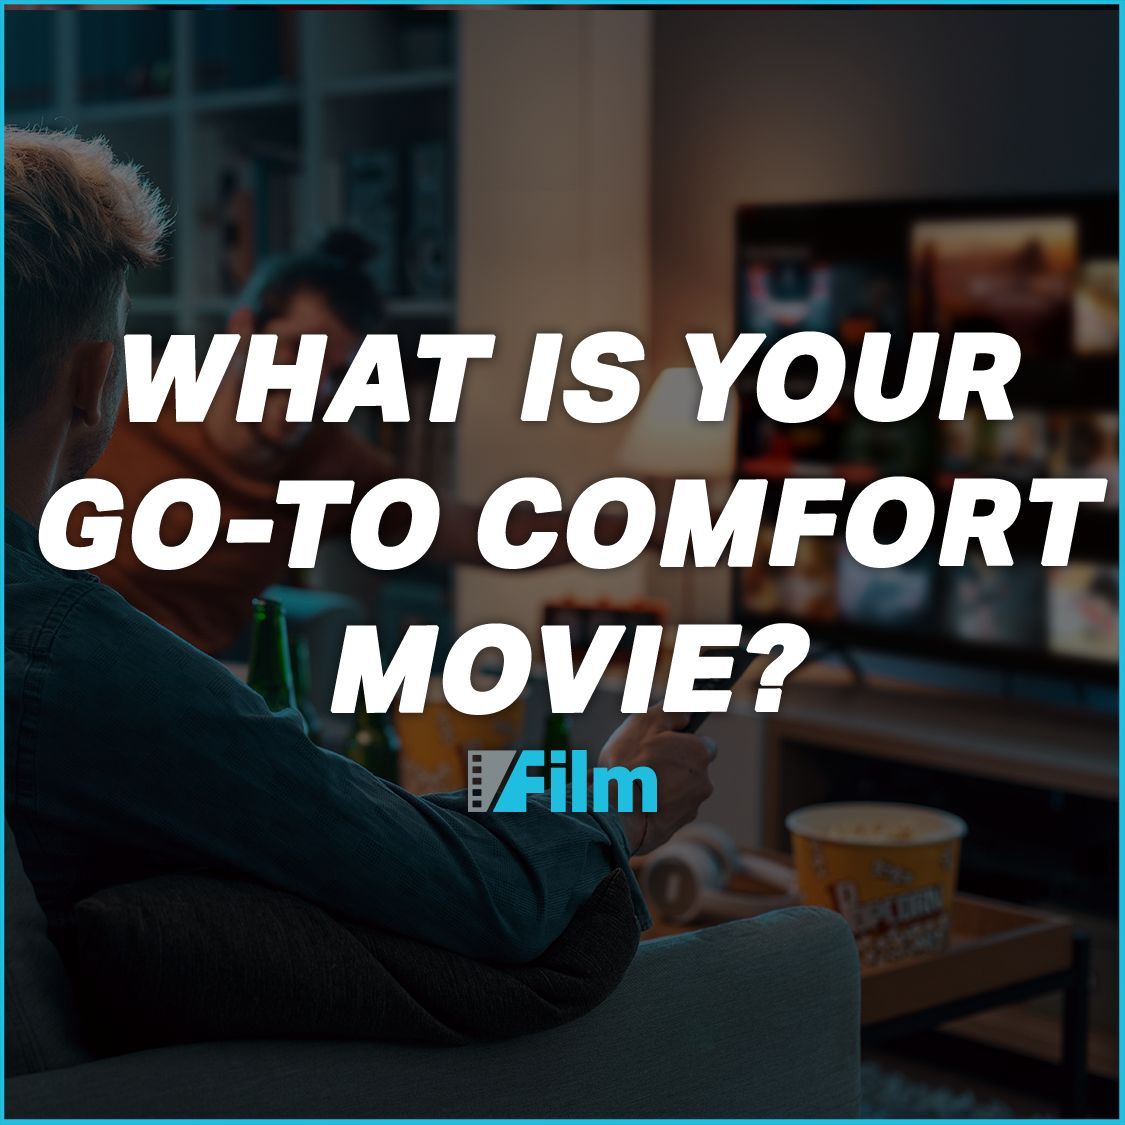 What is your go-to comfort movie? 🎬